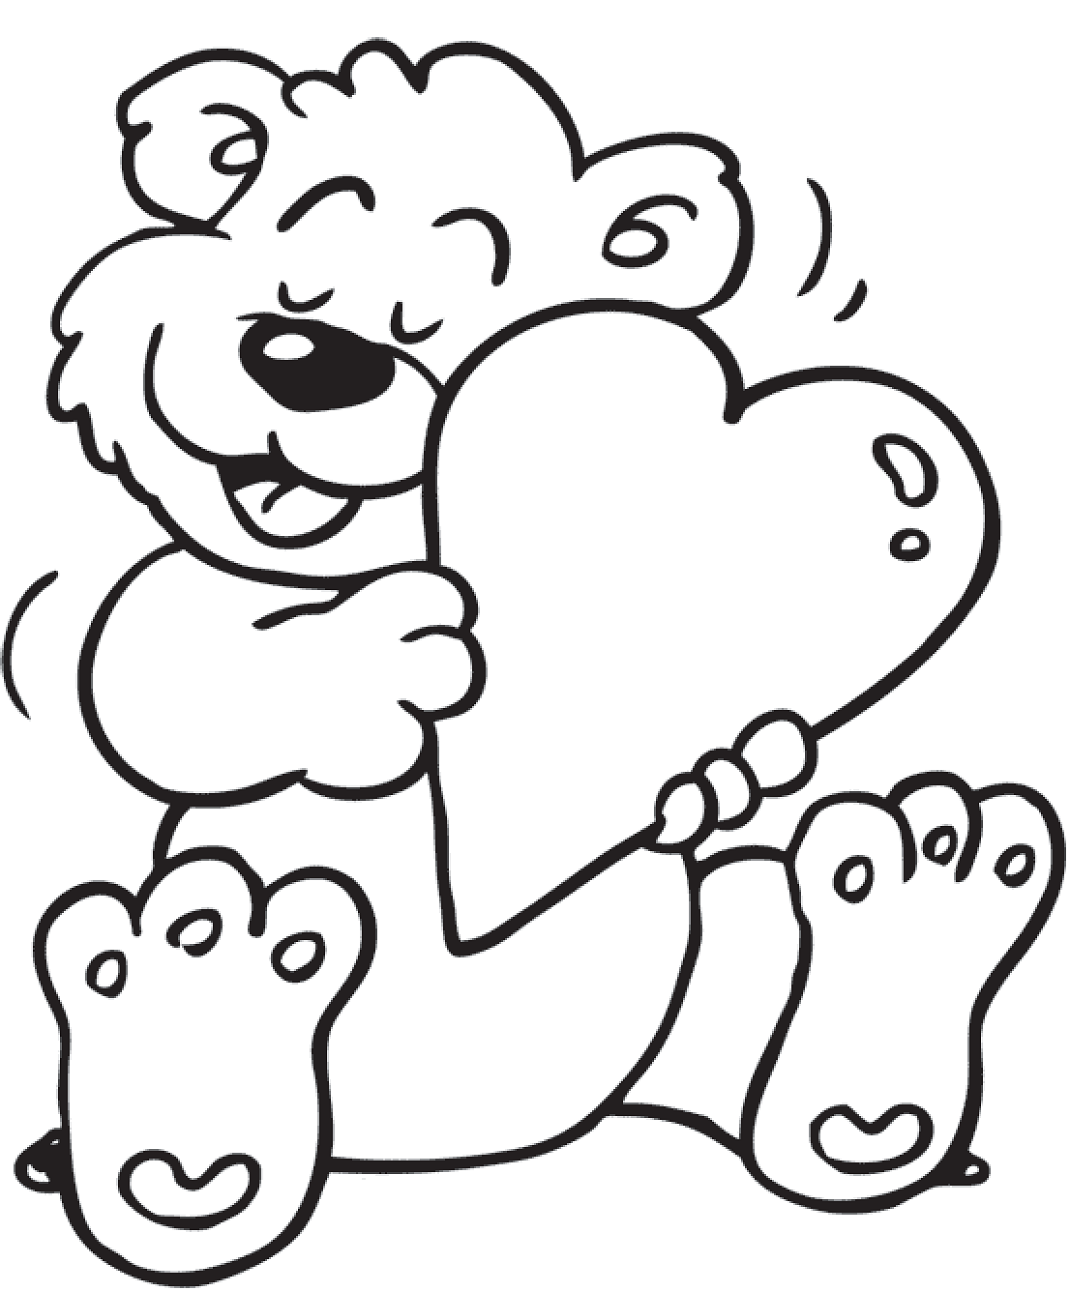 Click to see printable version of Amor de Oso Coloring page